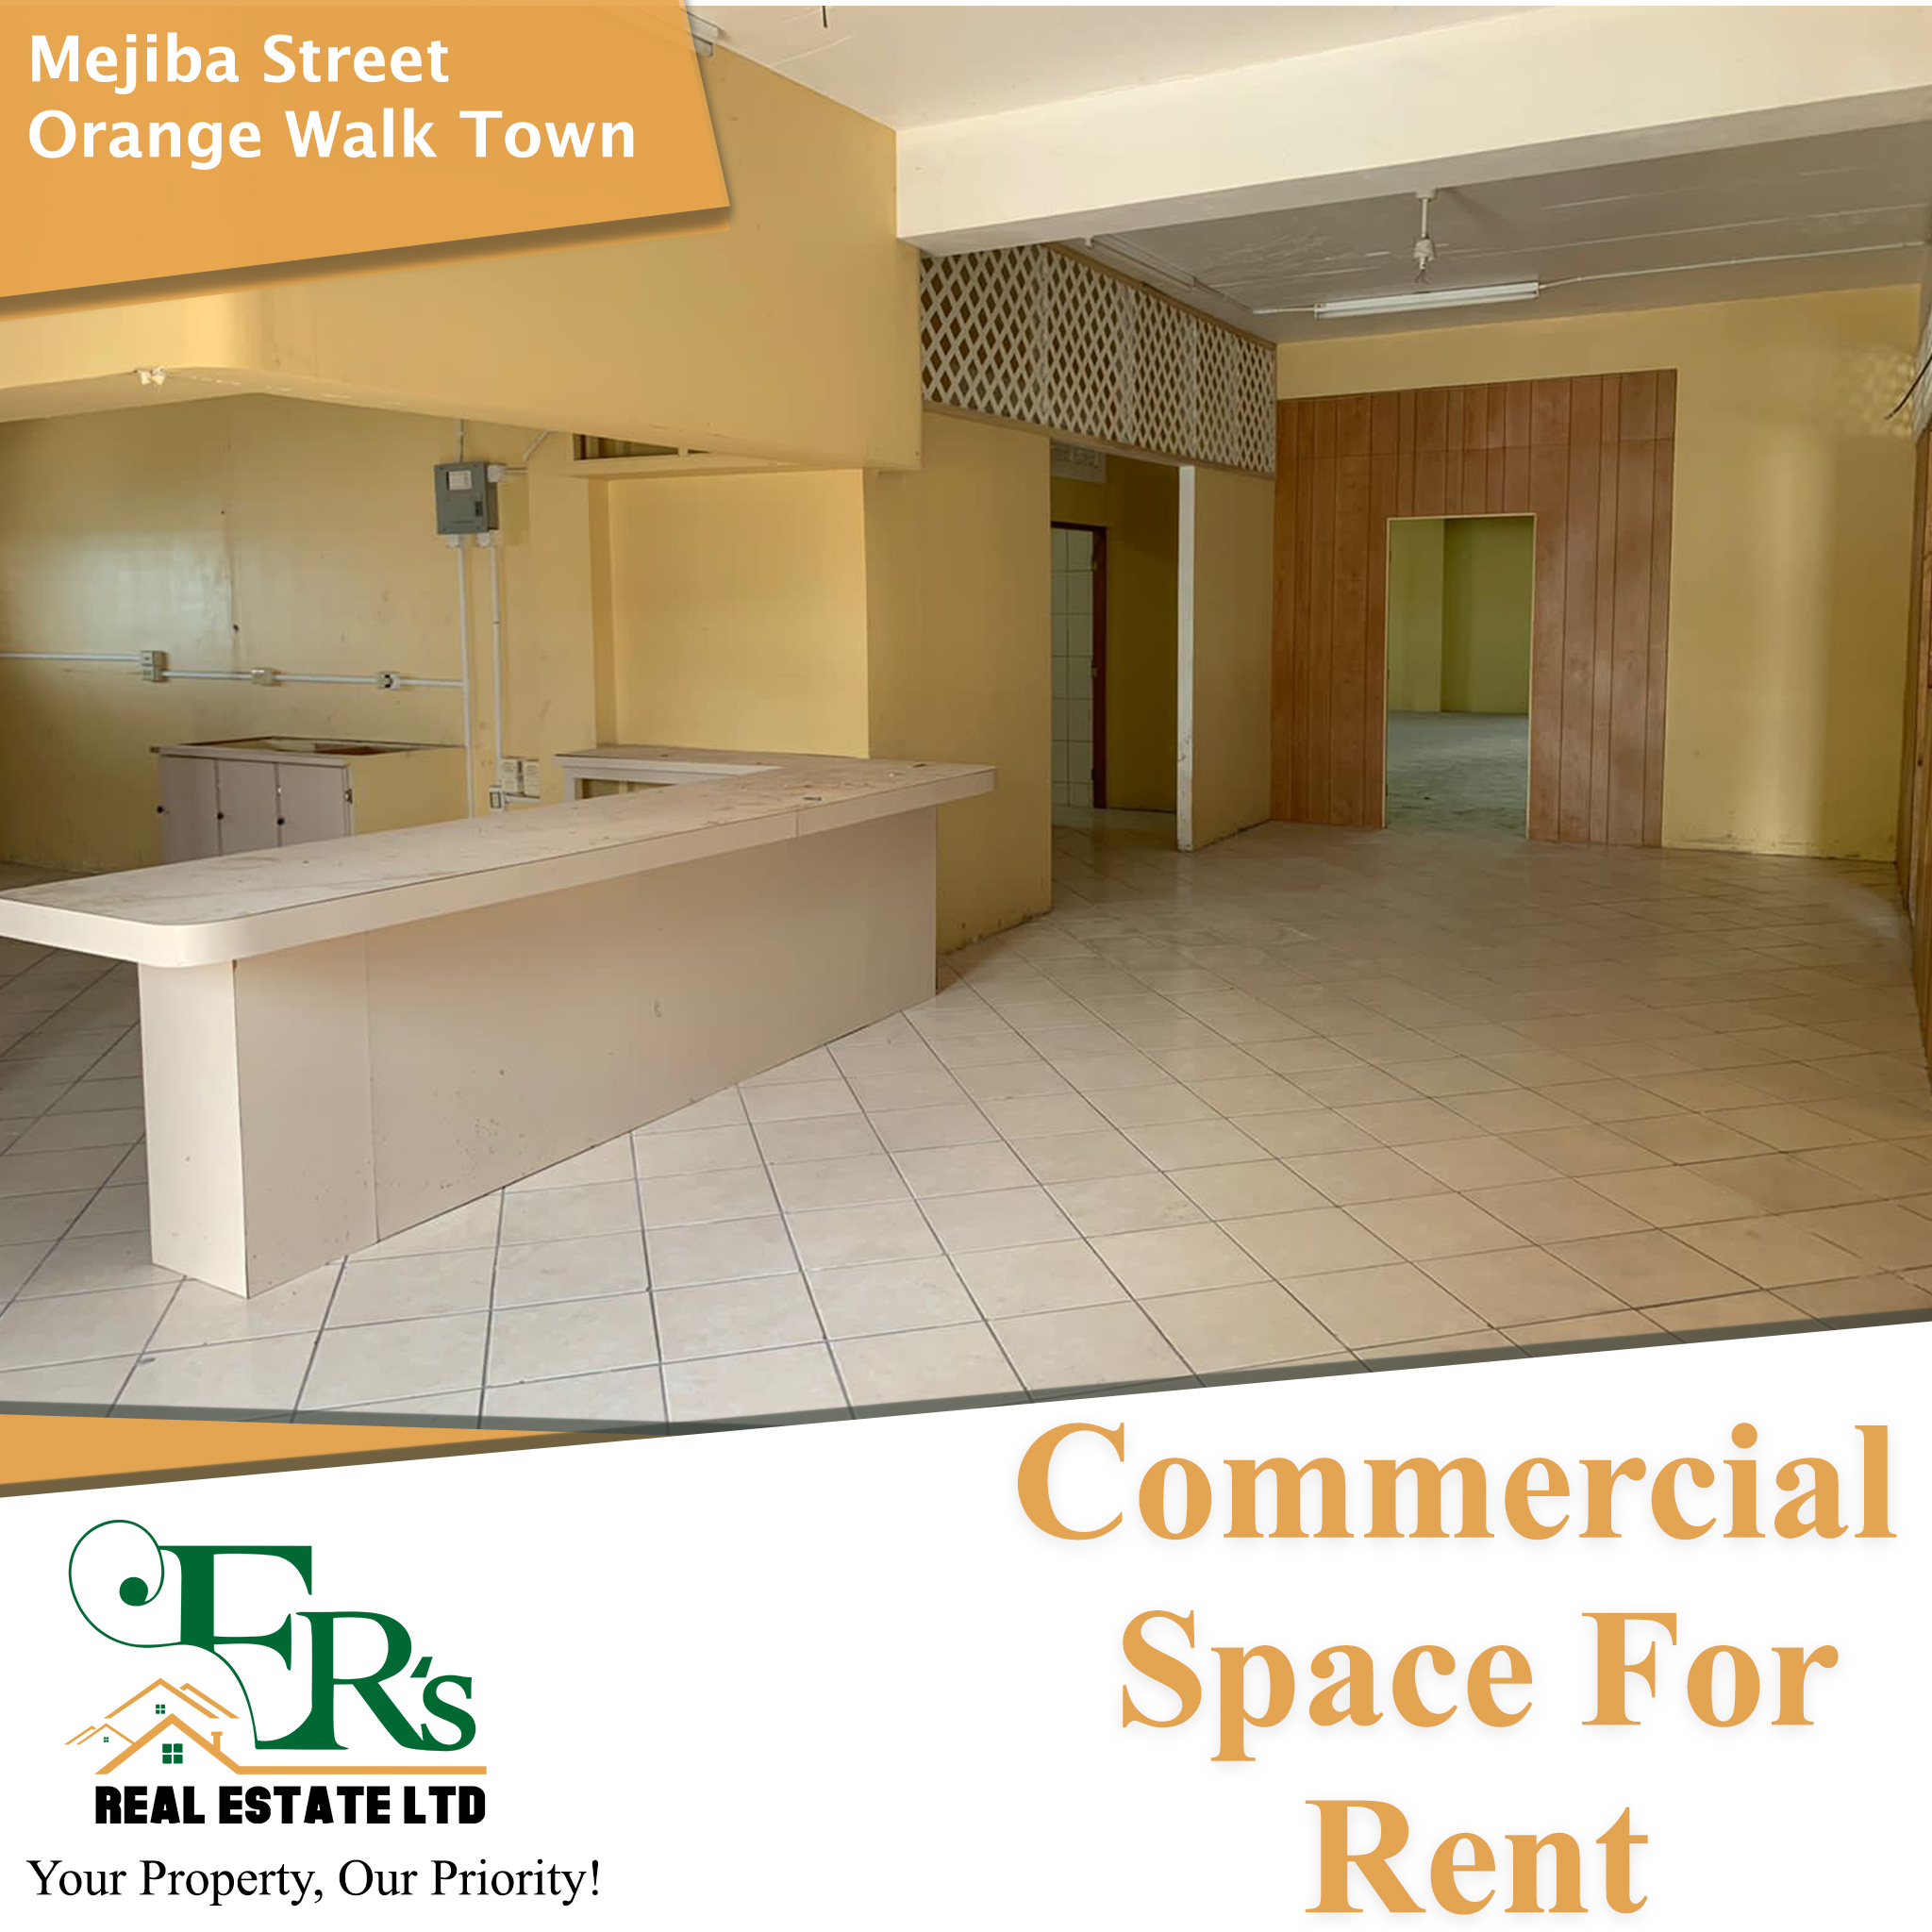 Commercial Space for Rent In Orange Walk Town